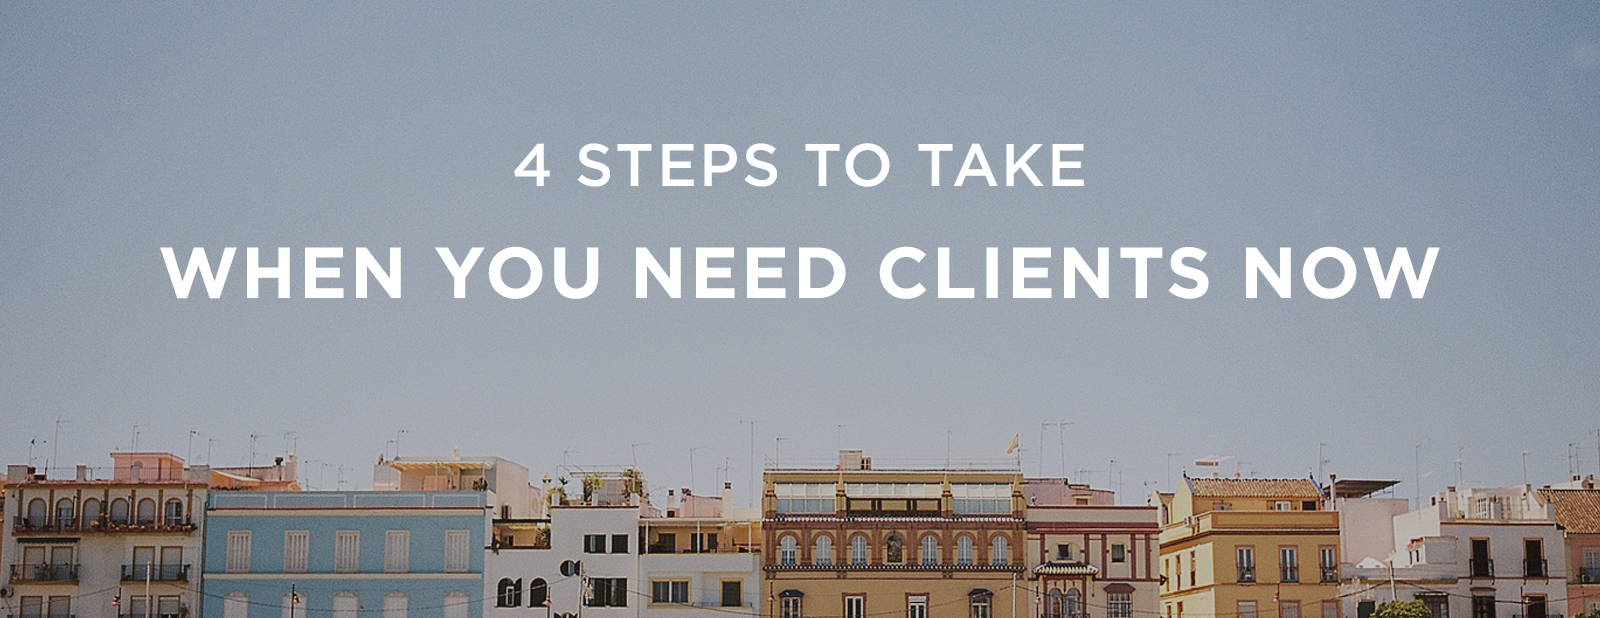 4 Steps When You Need Clients Now | via the Rising Tide Society